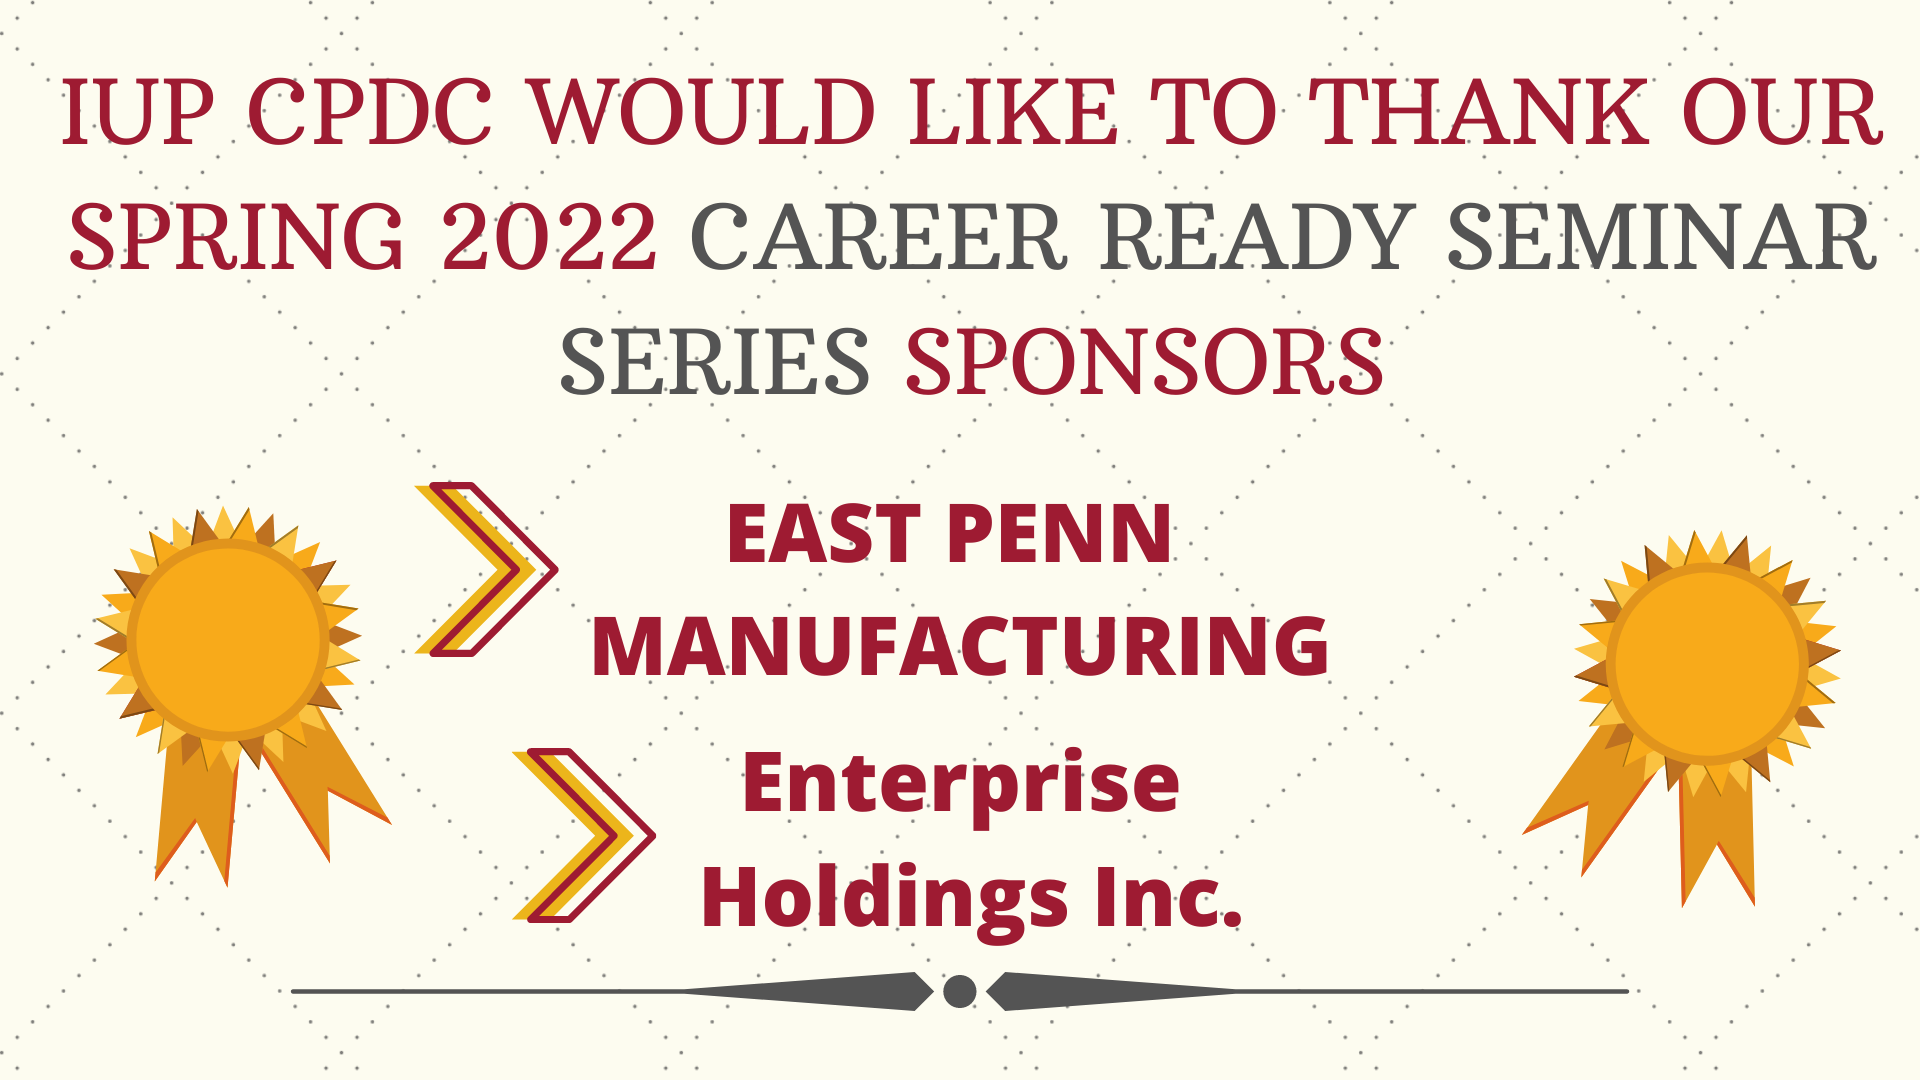 Spring 2022 Employer Sponsors are East Penn Manufacturing and Enterprise Holdings